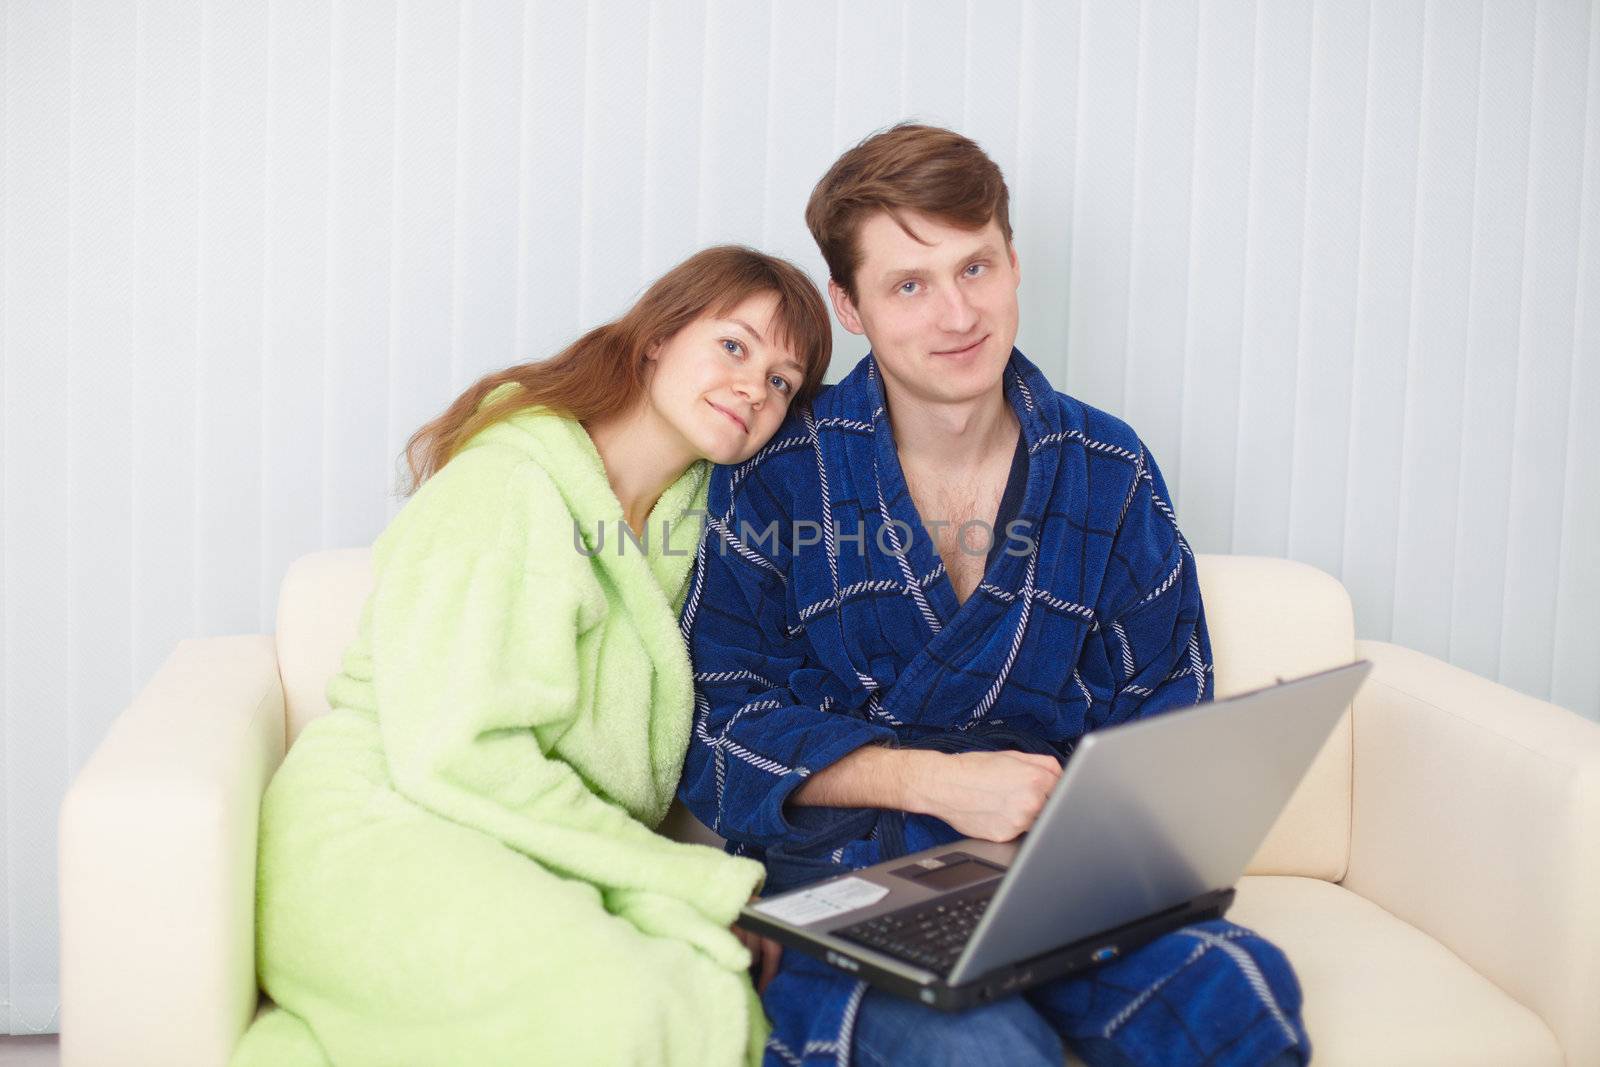 Young couple on a sofa with the laptop